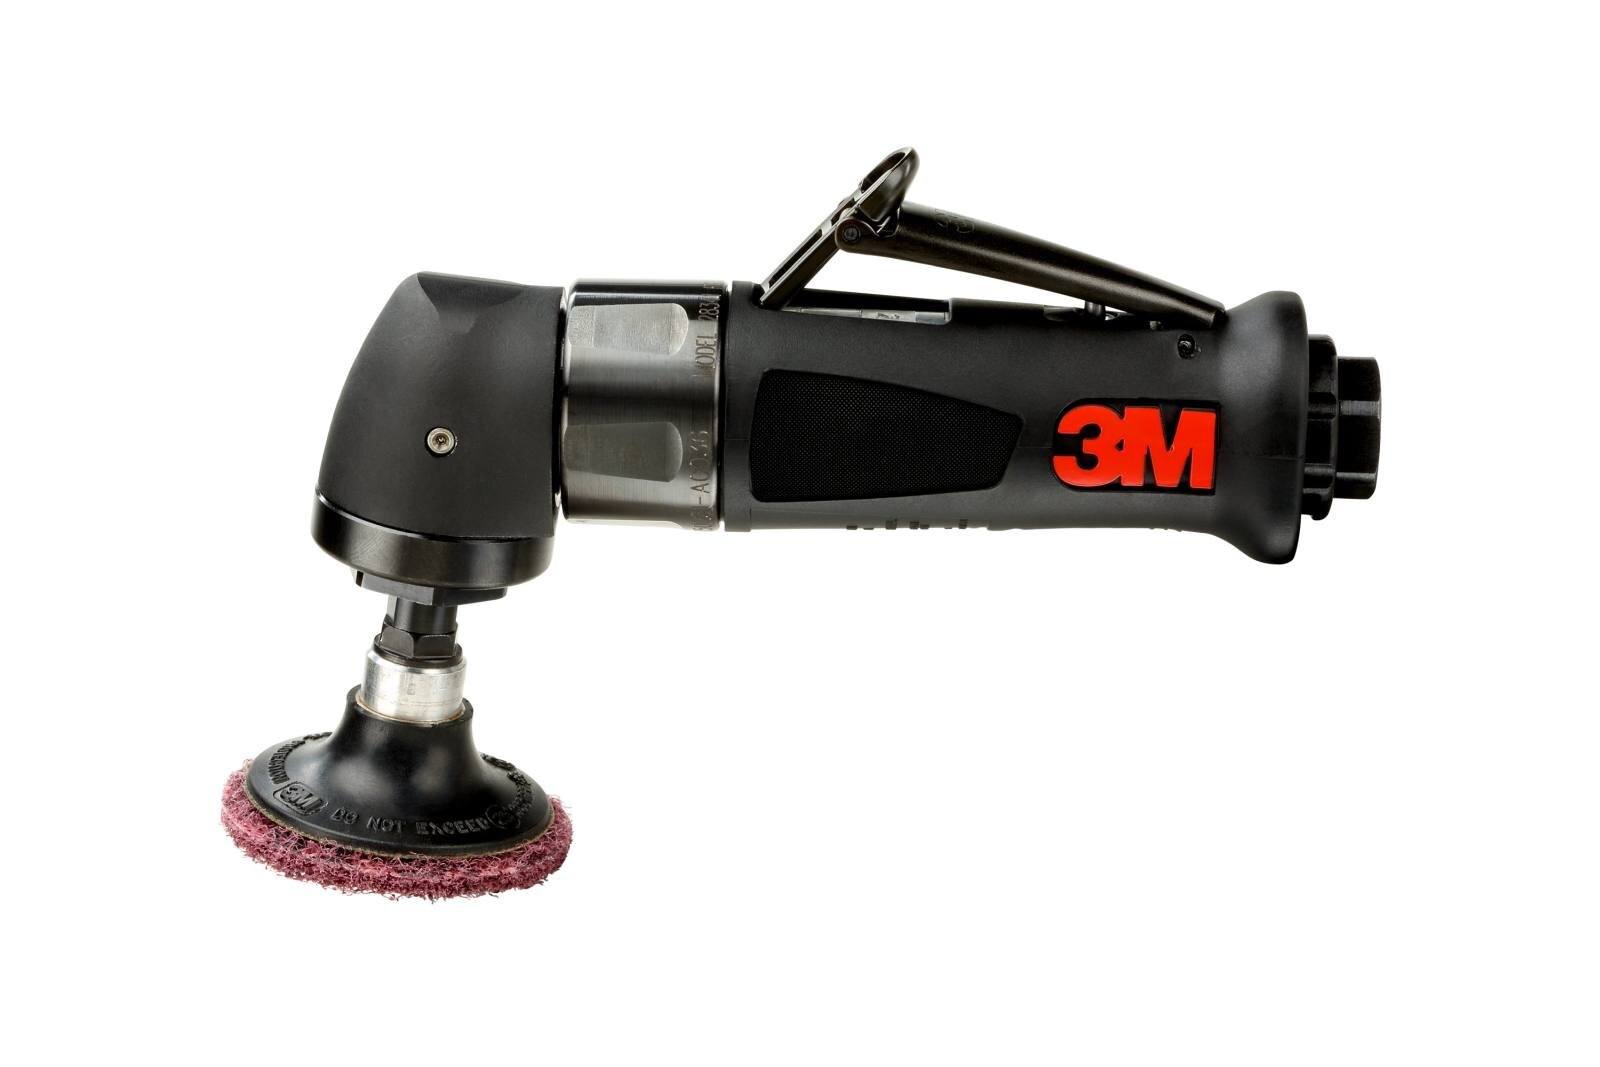 3M Roloc Pneumatic angle grinder 2nd generation, 76 mm, 0.3 hp, 20,000 rpm, 6 mm collet chuck